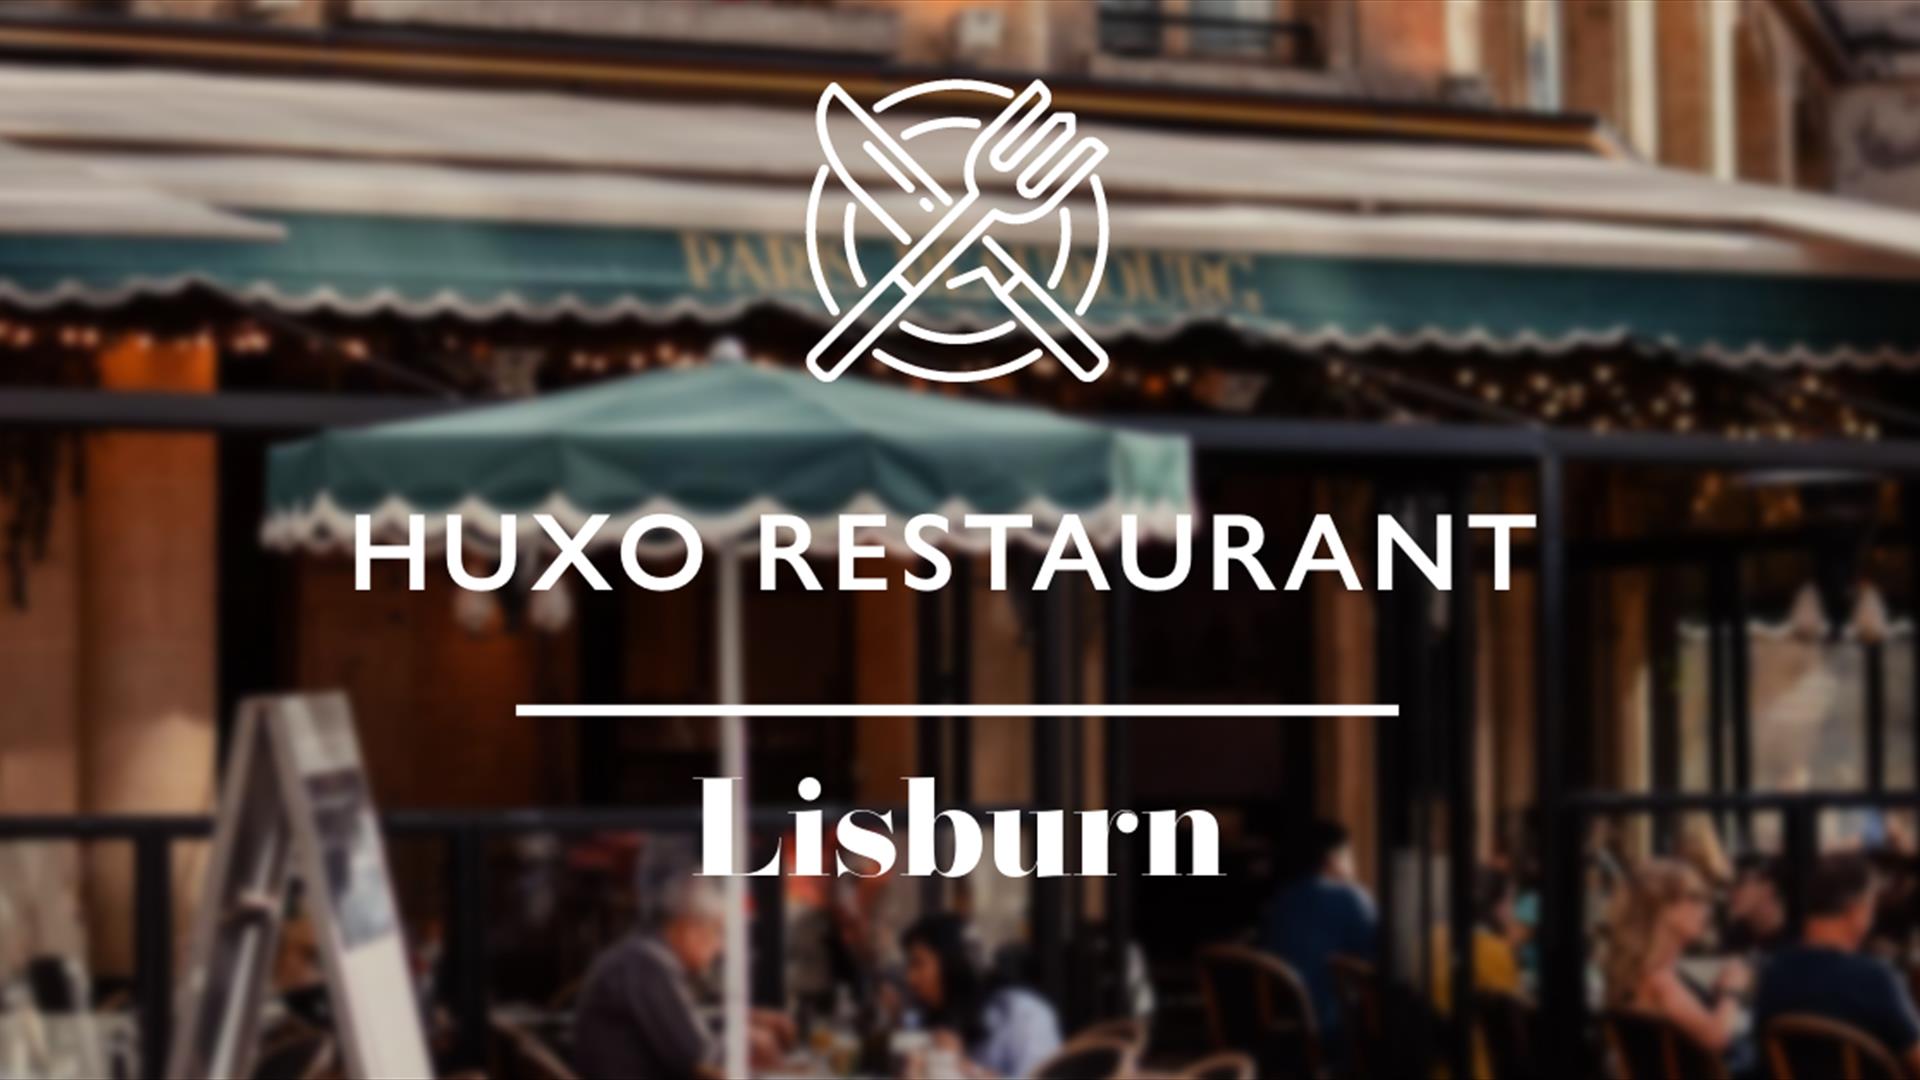 Image shows picture of diners and knife and fork logo at Huxo Restaurant